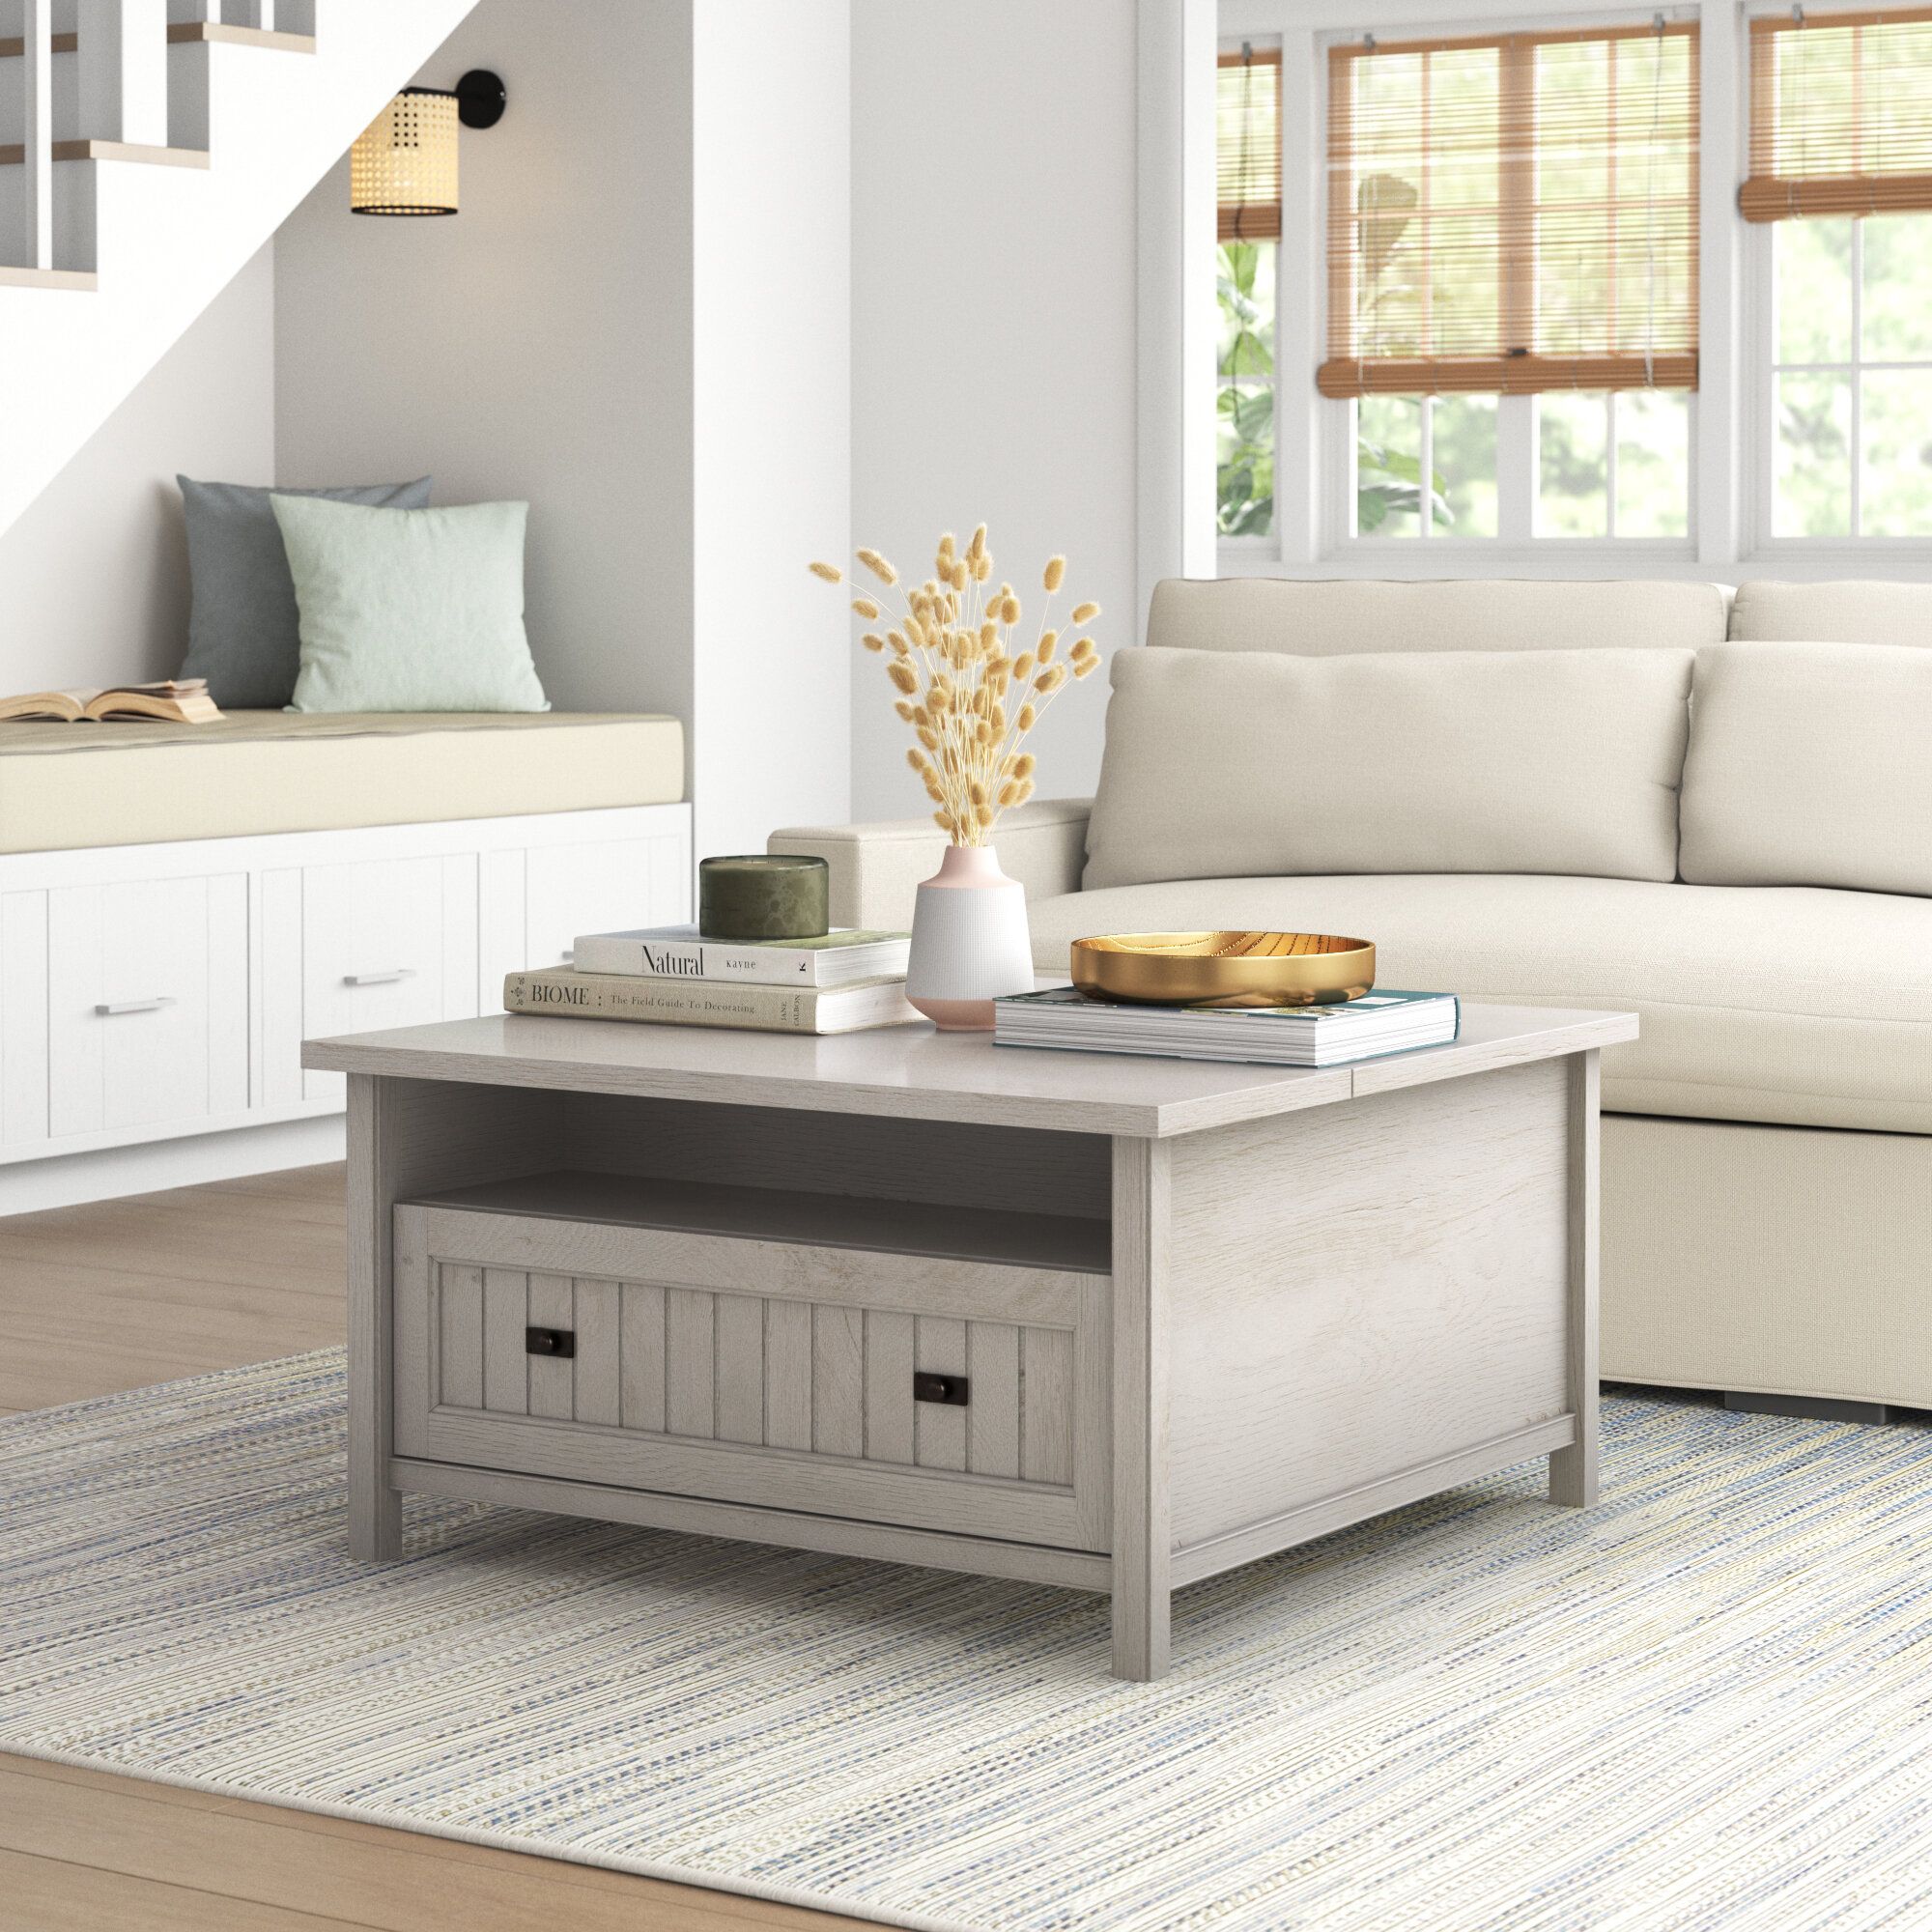 Sand & Stable Karlee Coffee Table & Reviews | Wayfair Throughout Lift Top Coffee Tables With Storage Drawers (View 11 of 15)